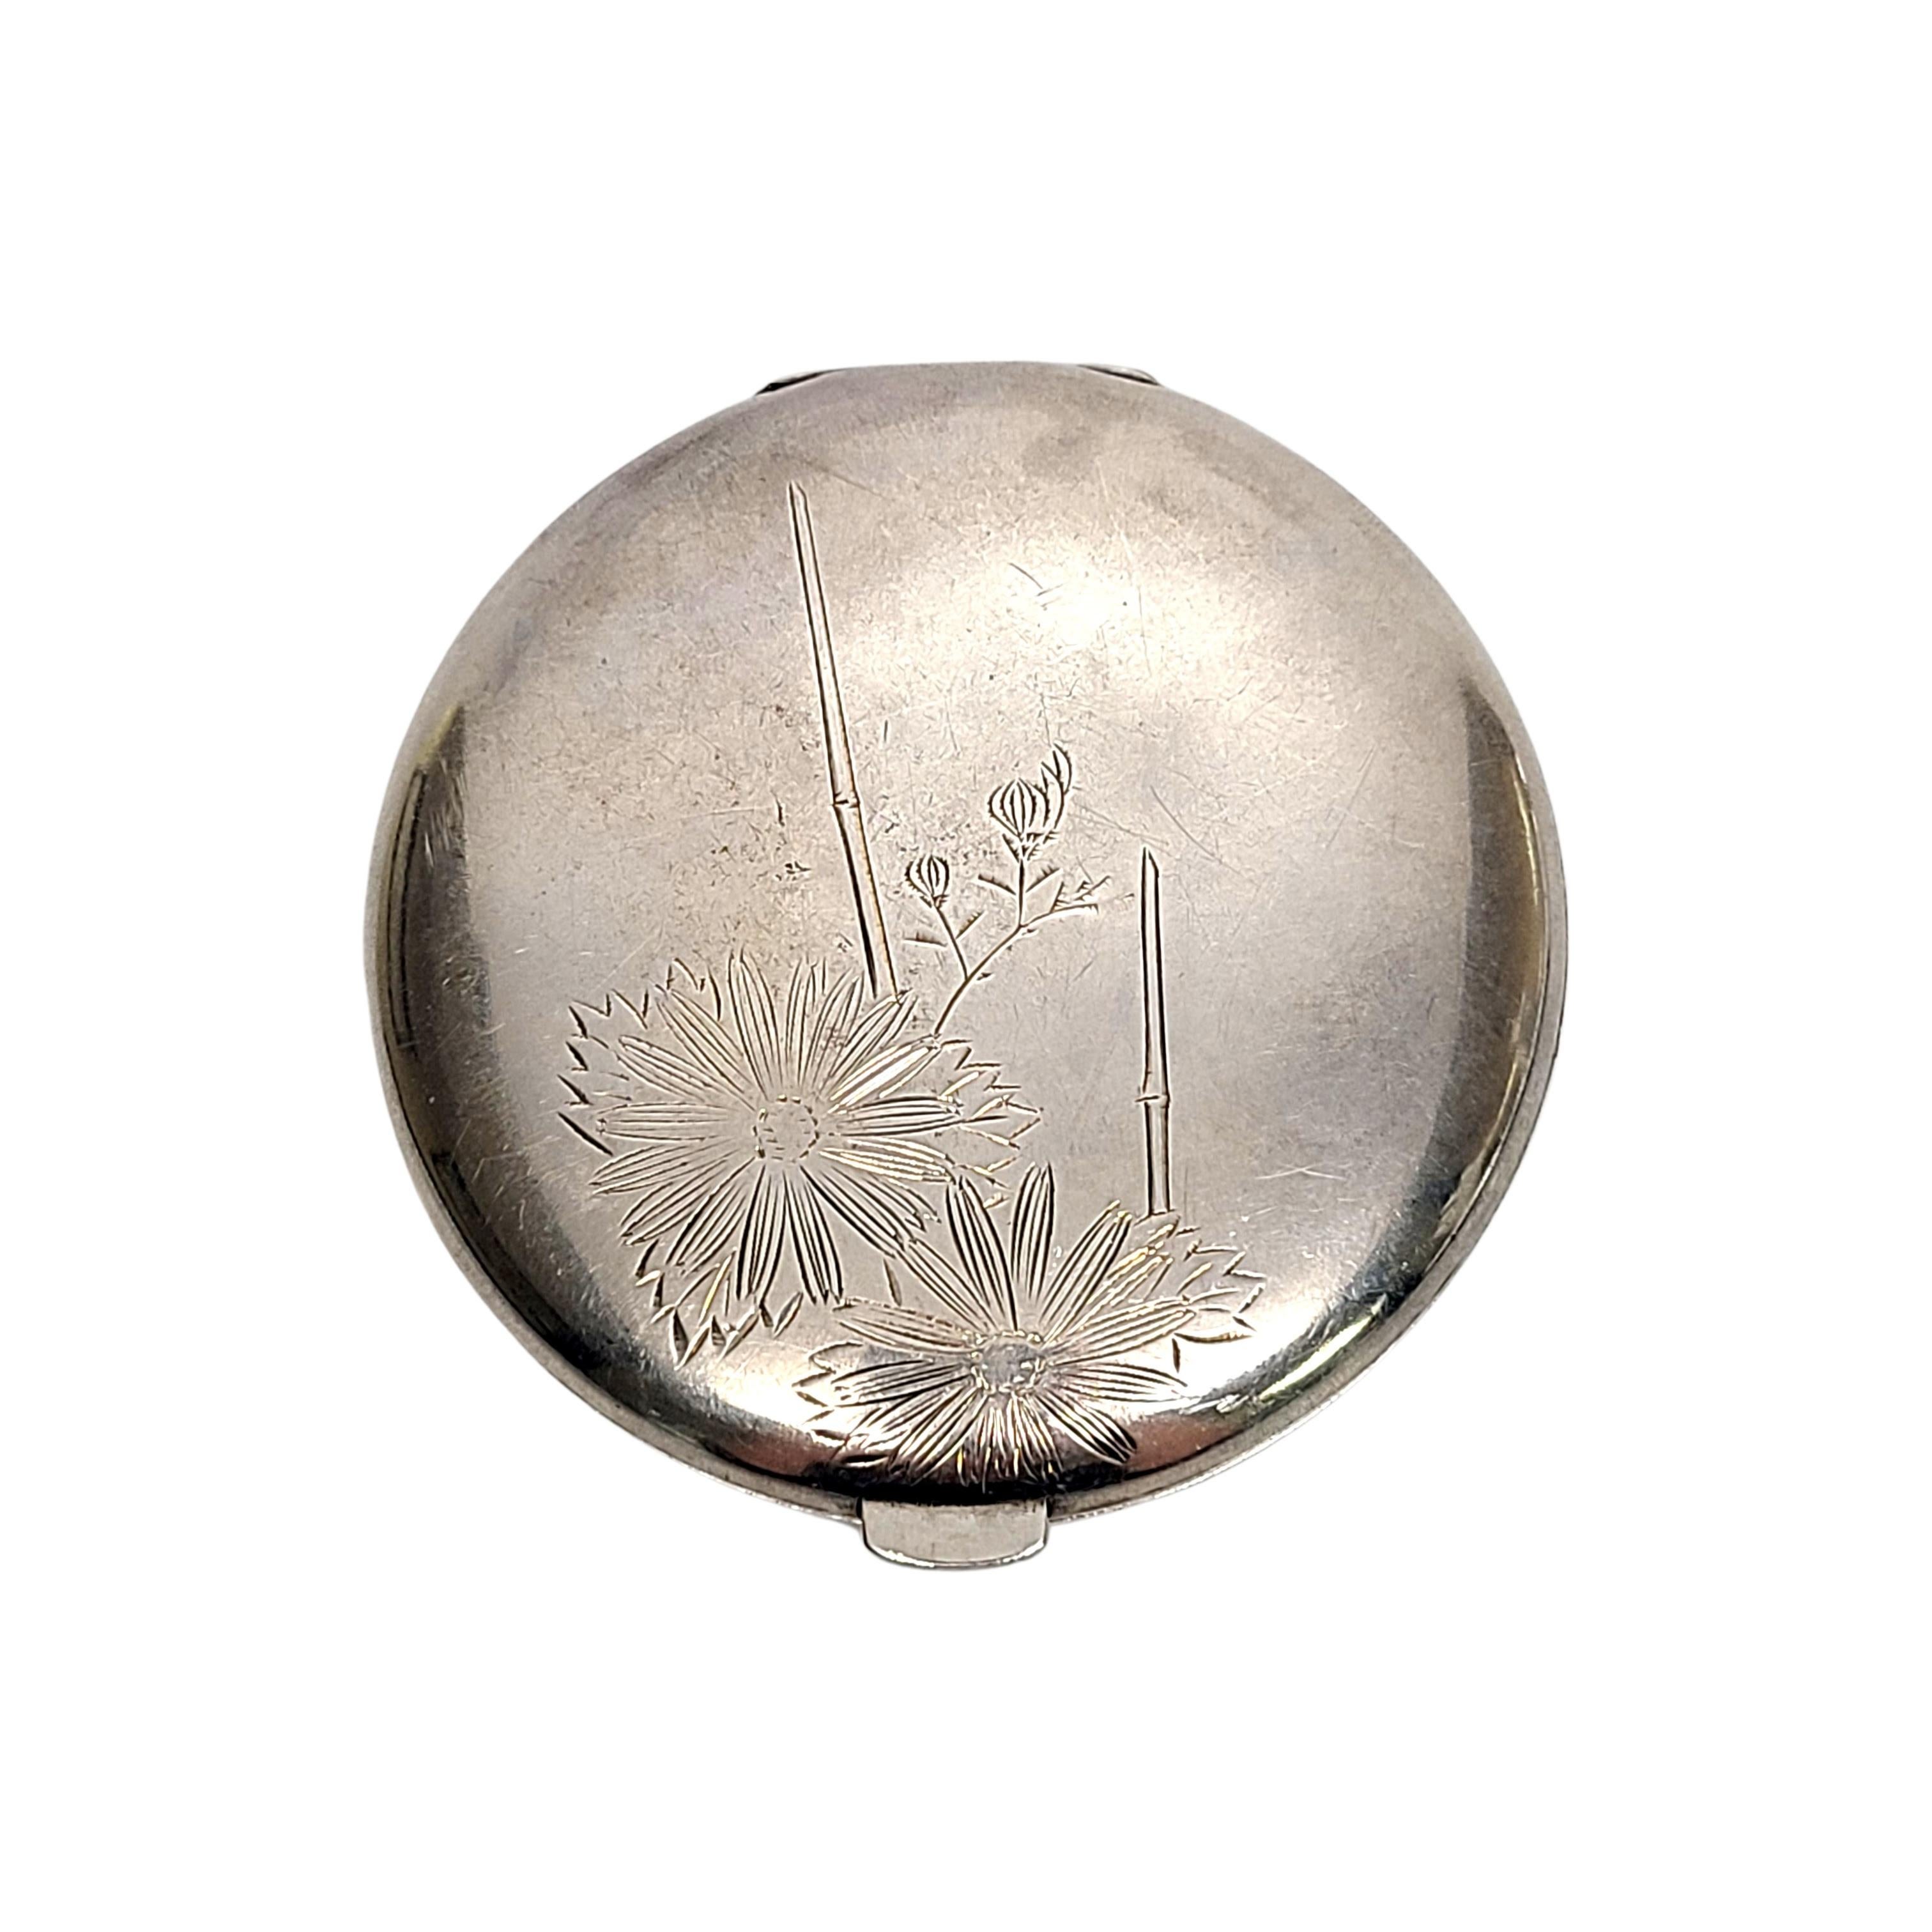 Sterling silver round compact.

Beautiful etched daisy floral motif on both sides. Interior top lid is mirrored, bottom lid has a hinged powder compartment. Push button opening.

No monogram.

Measures 2 7/8